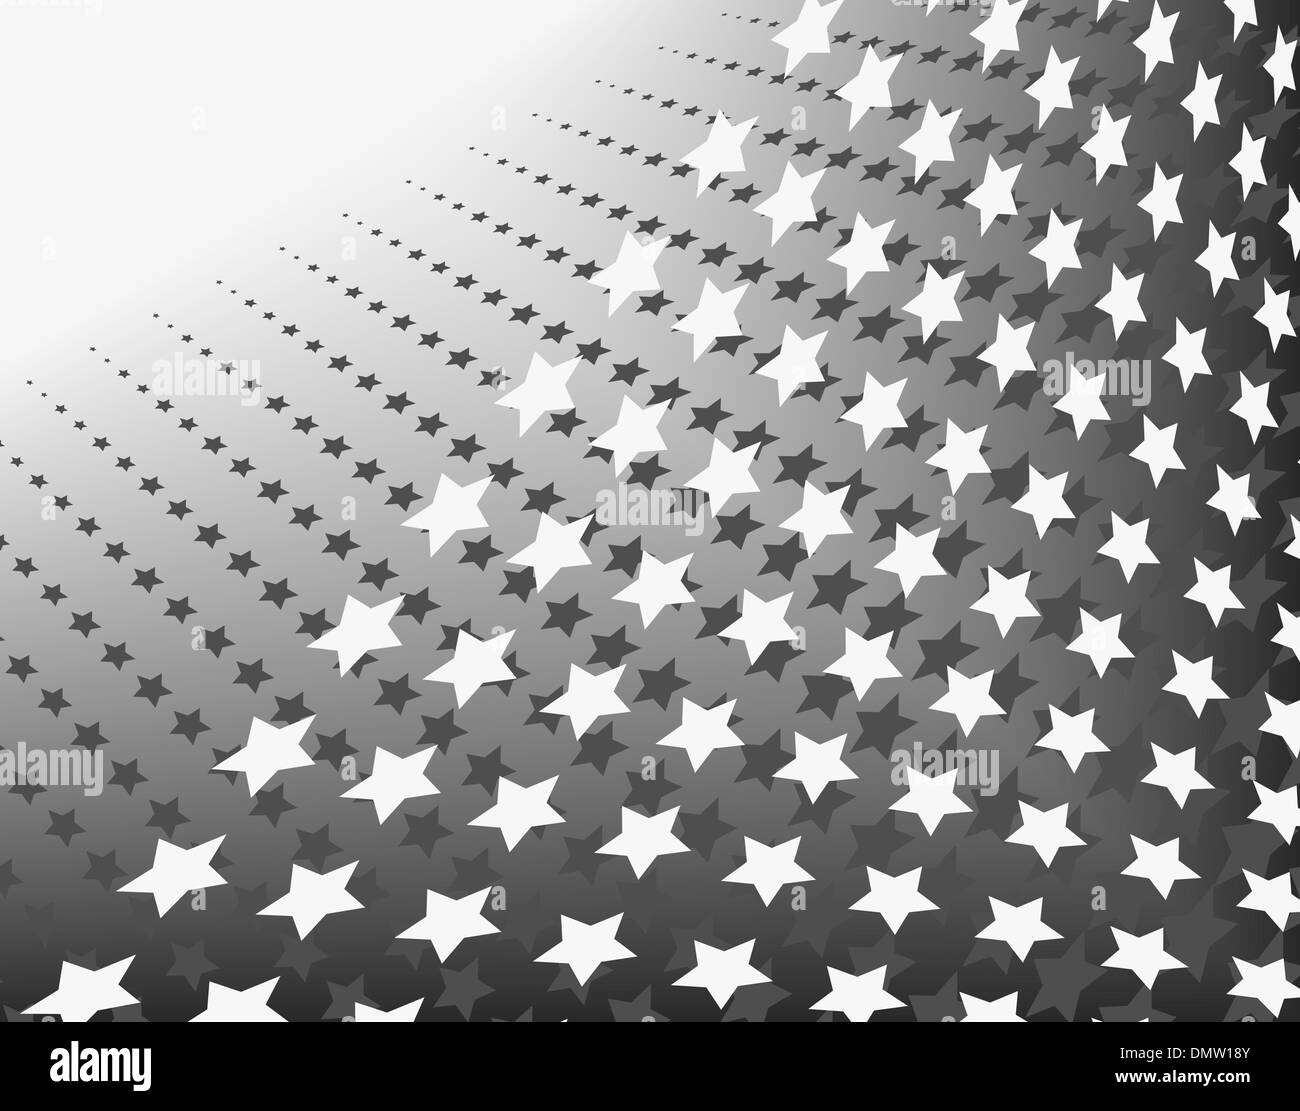 Stars and stripes Black and White Stock Photos & Images - Alamy